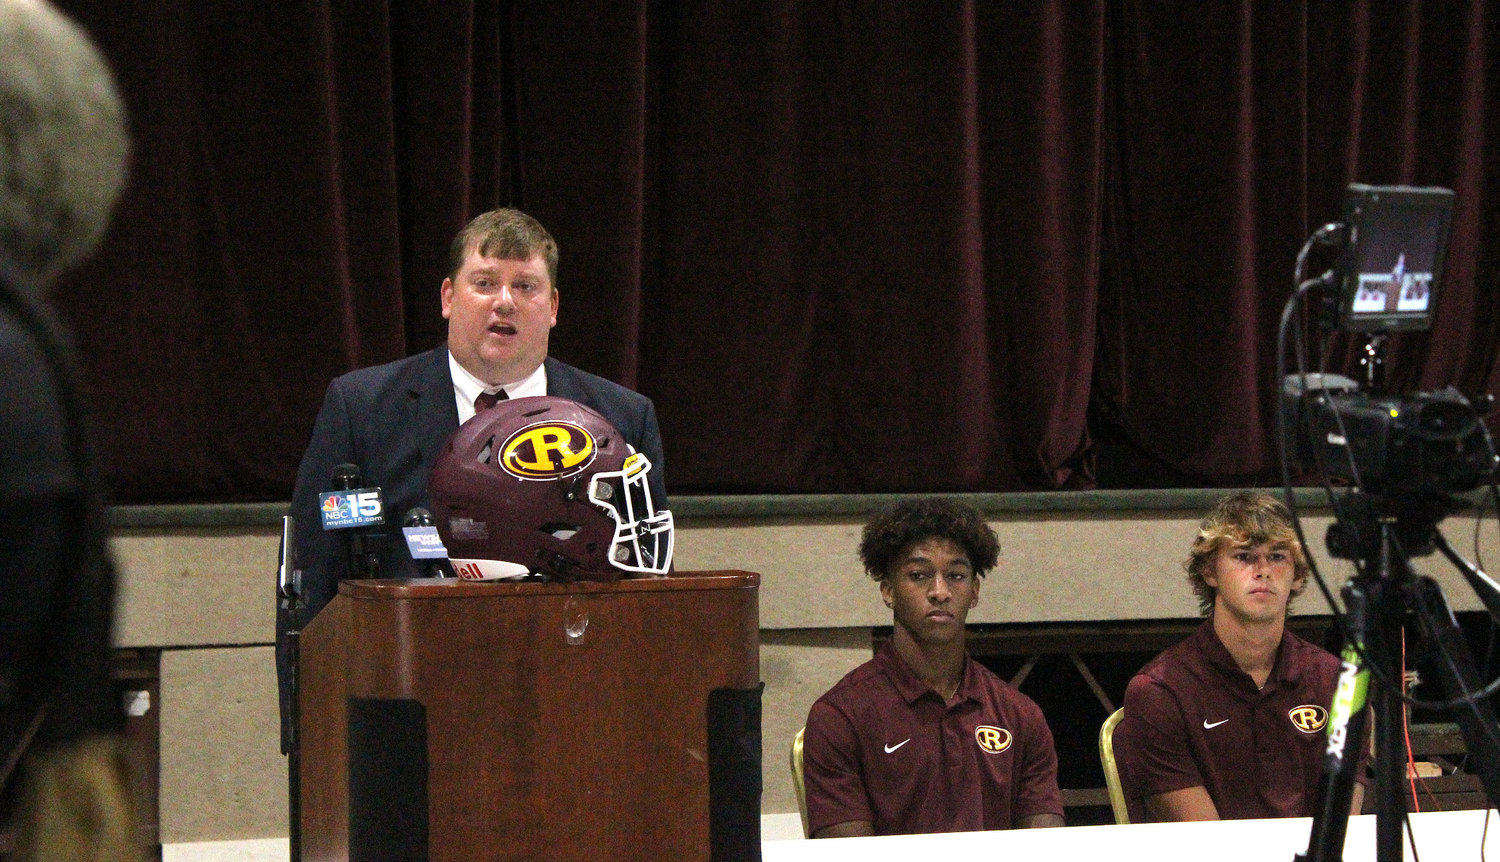 Robertsdale head coach Kyle Stanford answers a question during last Wednesday’s Baldwin County Media Day at Daphne High School previewing the upcoming season. He was joined by seniors Braydon Davis and Christian Abrams in representing the Golden Bears.